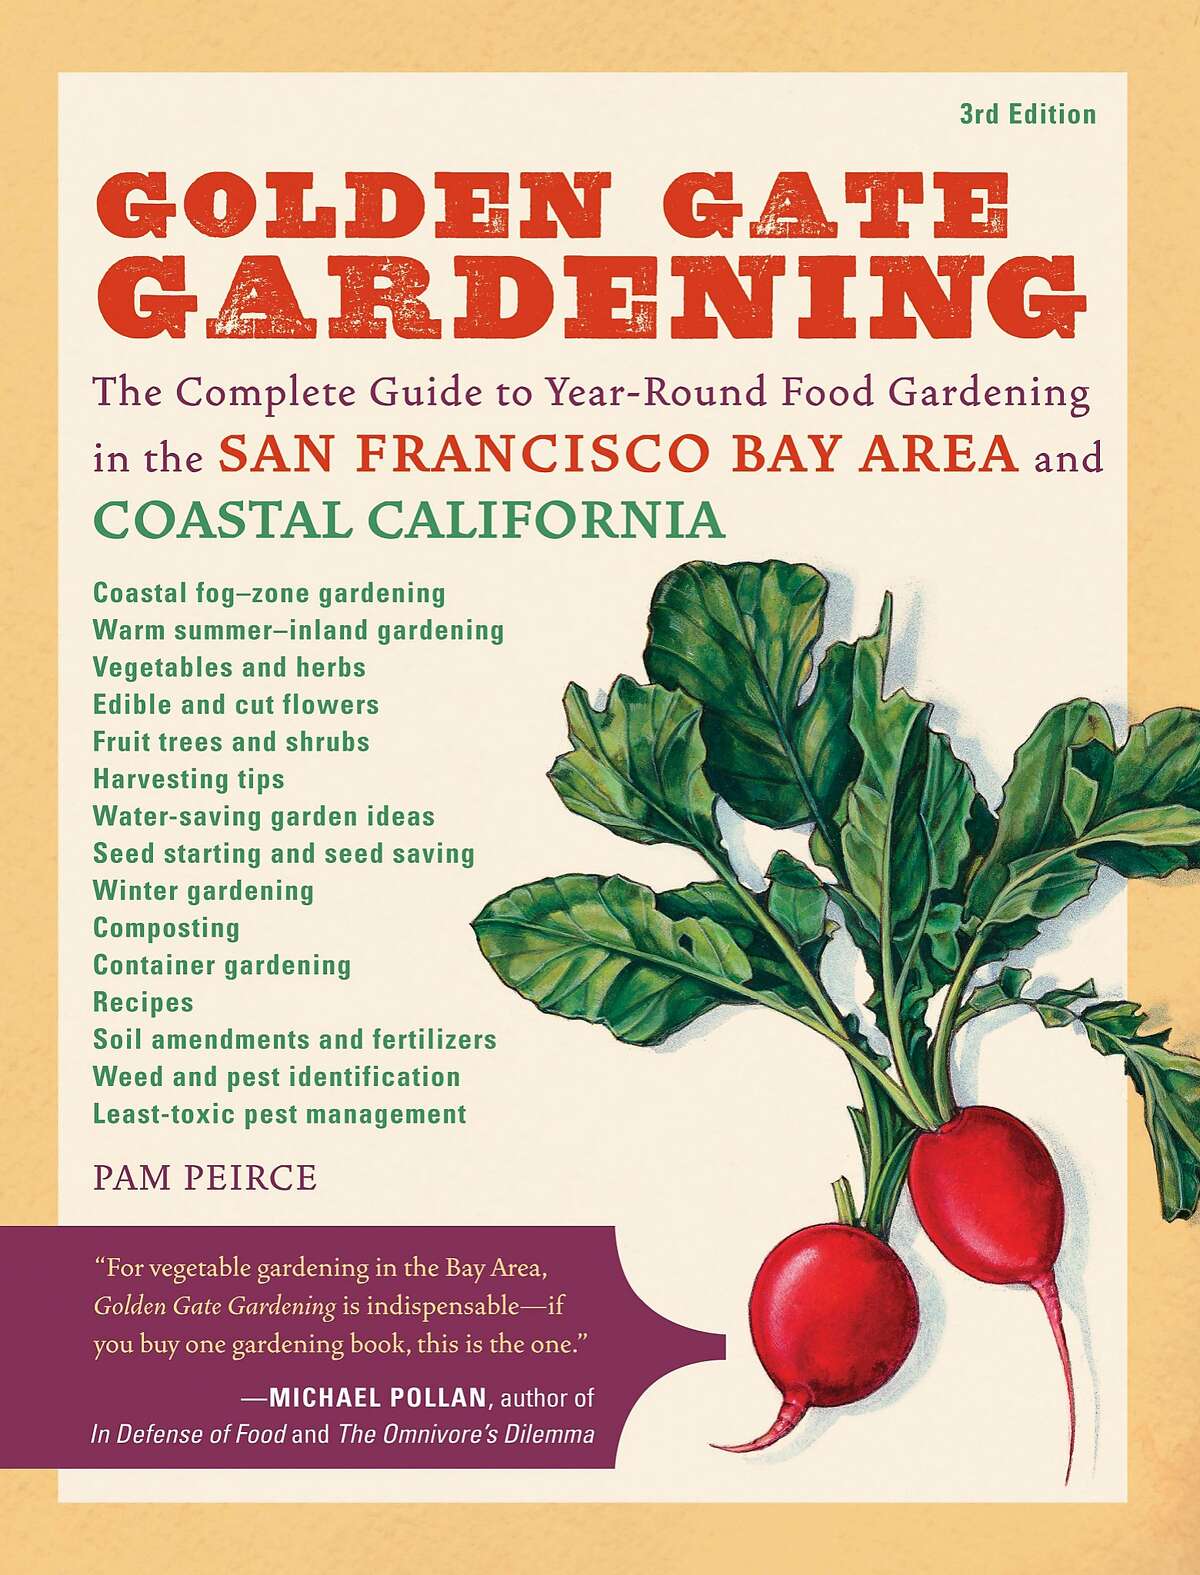 Pam Peirce's book, "Golden Gate Gardening: The Complete Guide to Year-Round Food Gardening in the San Francisco Bay Area and Coastal California." Cover credit: Sasquatch Books Photo: Pam Peirce